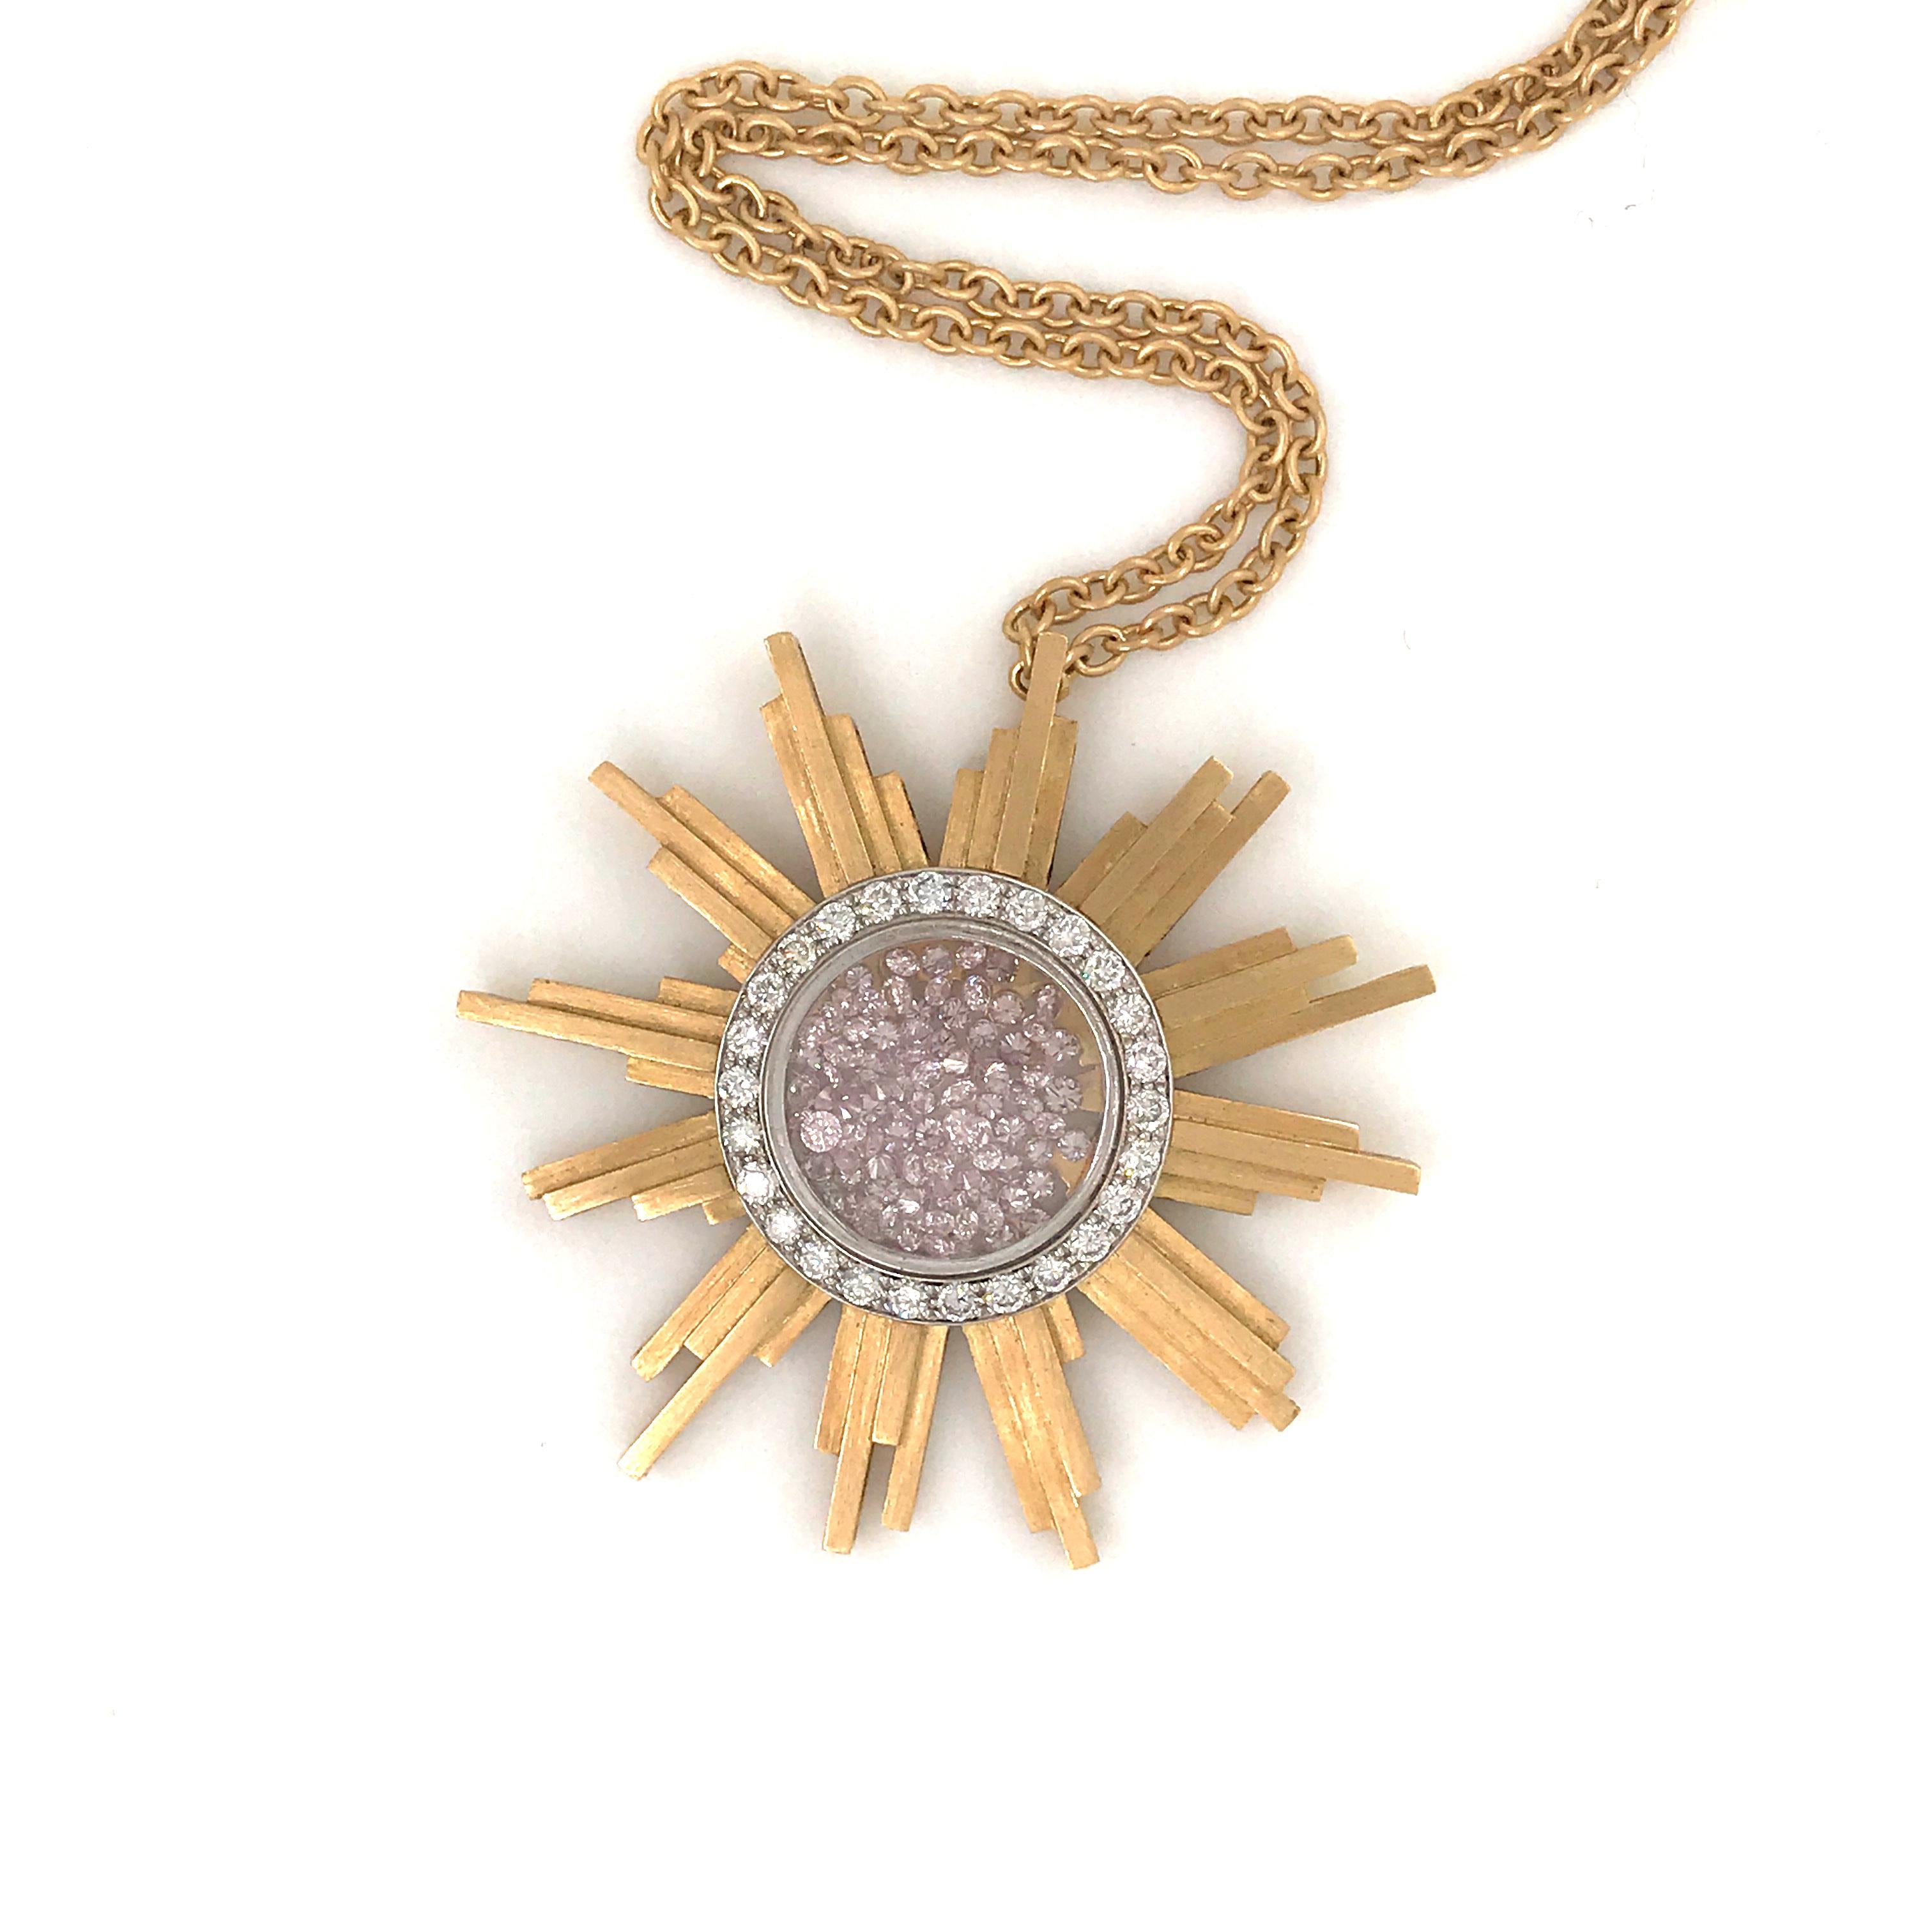 Necklace, Yellow Gold Sun 34 Grams, Diamonds White and Pink 2.27 Carat, Unique 1